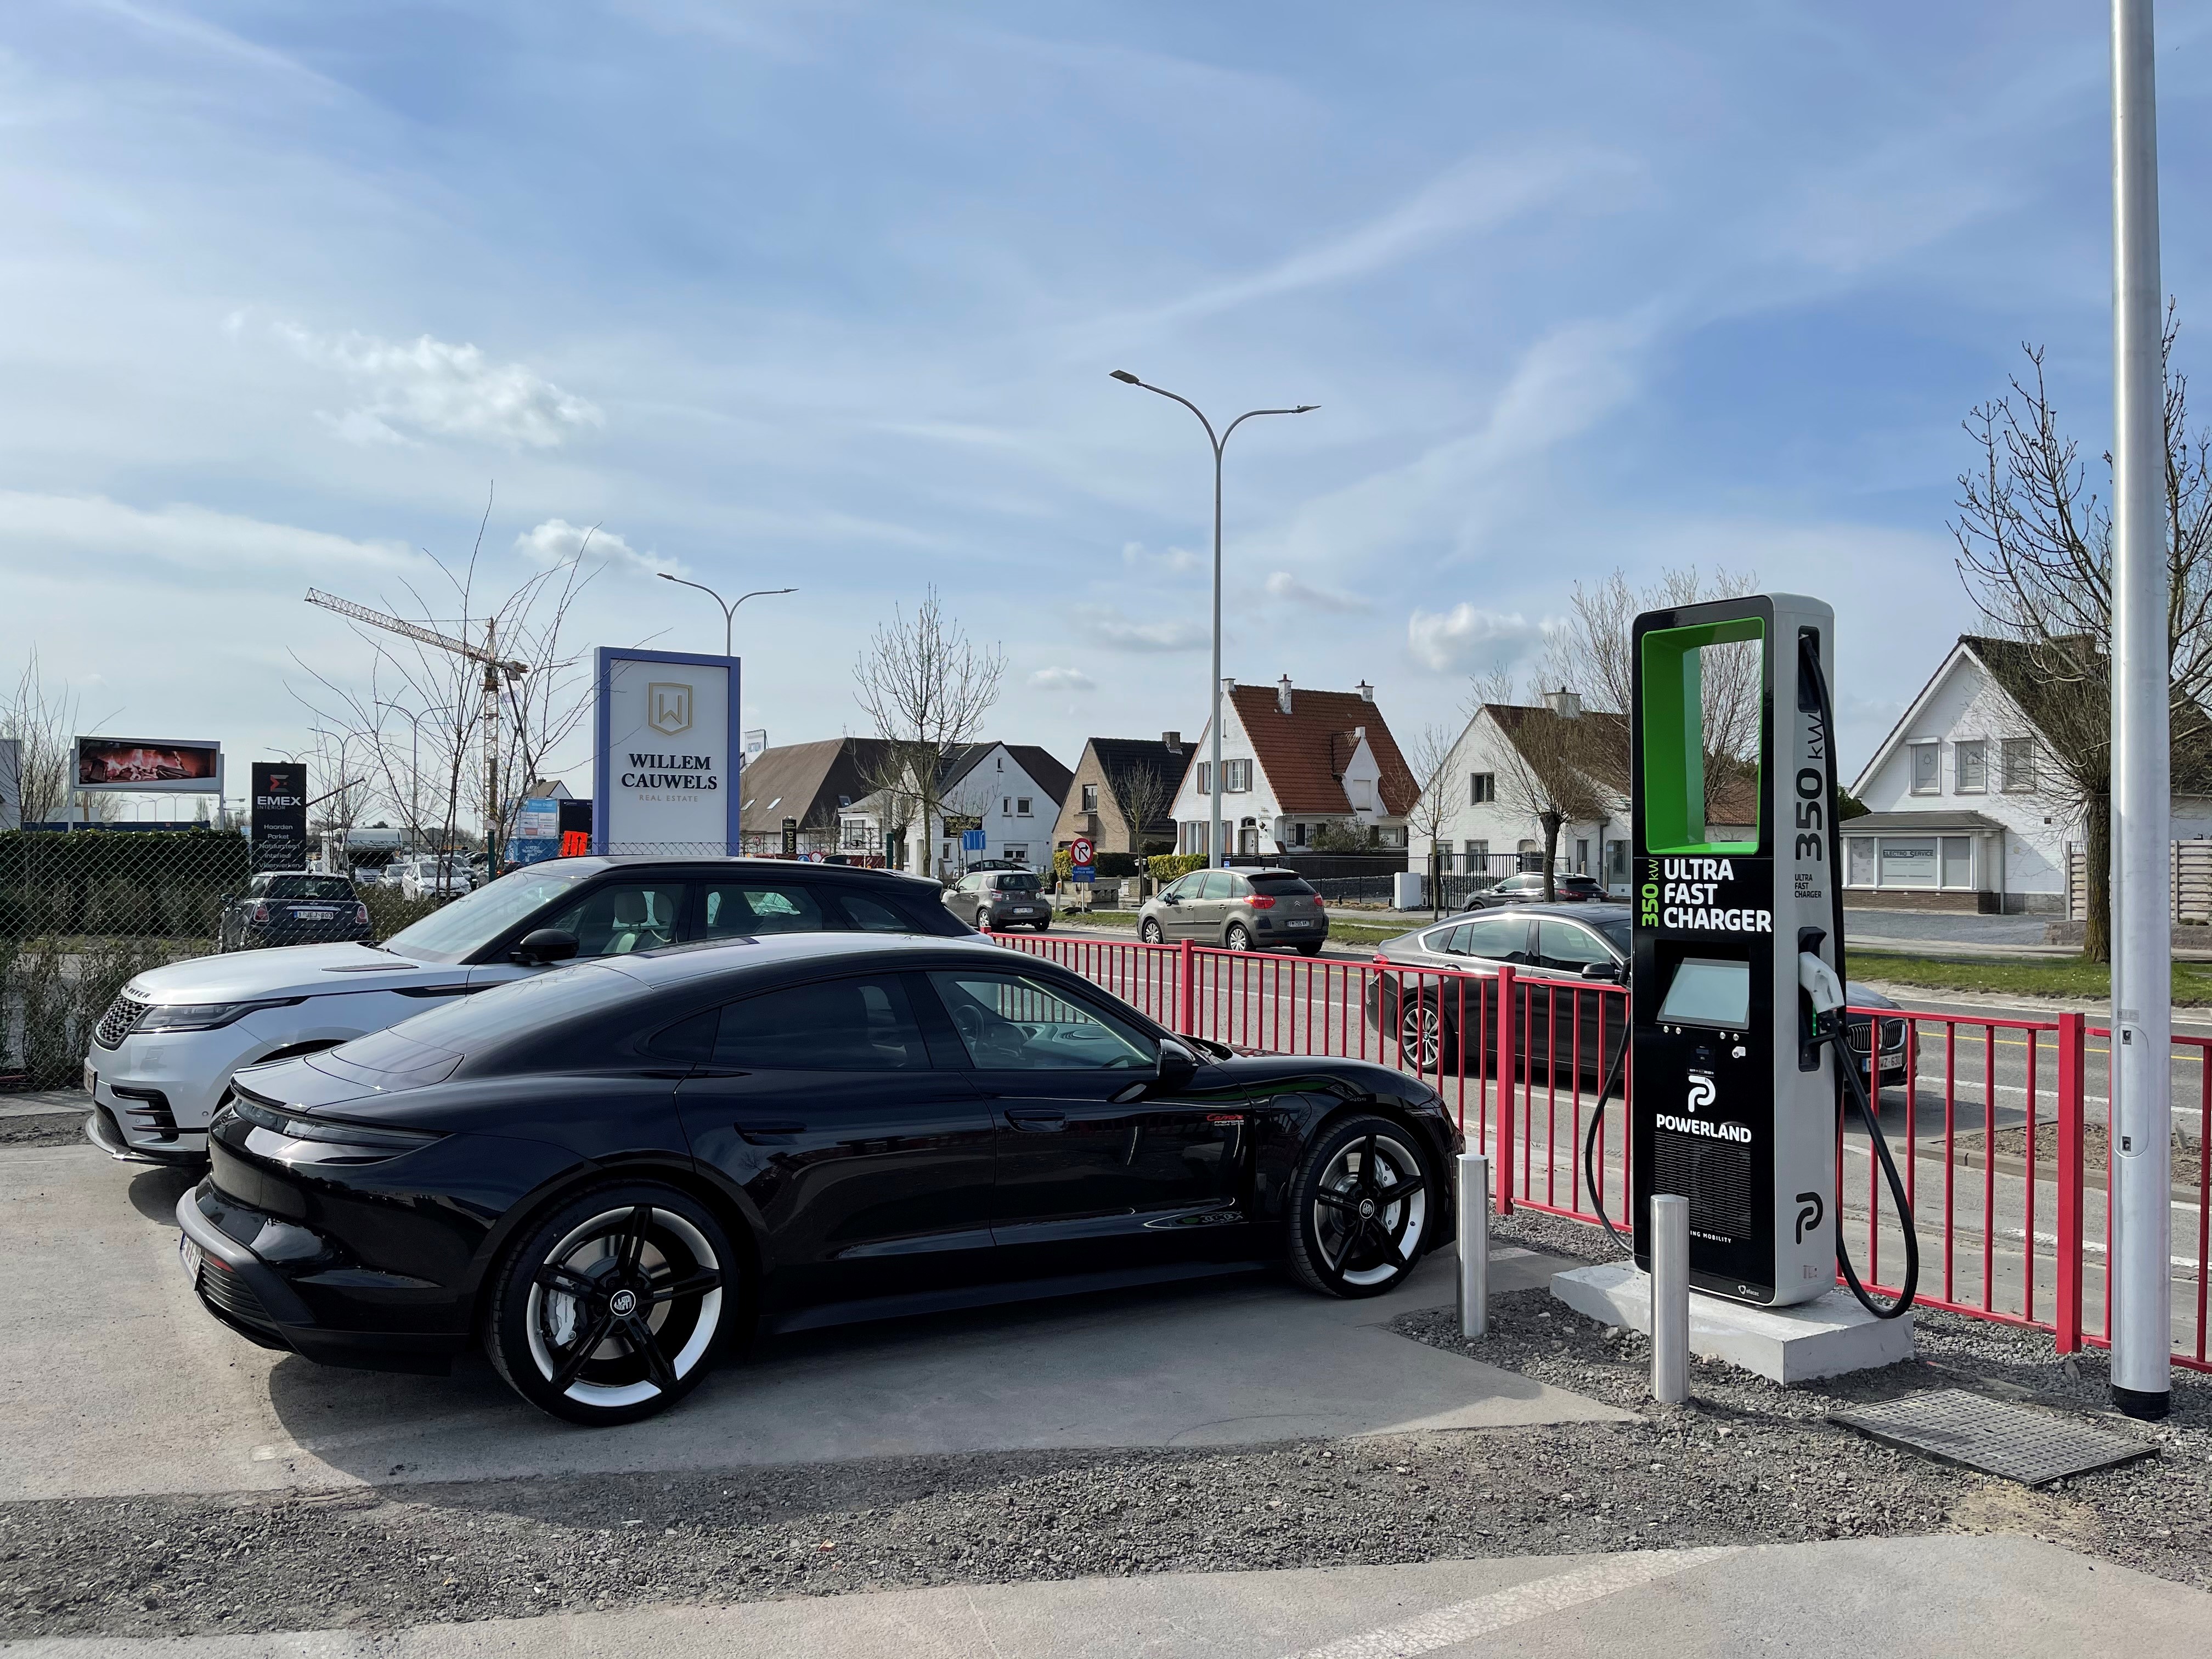 Ultra Fast Charger 350kW by Knokse Bandencentrale